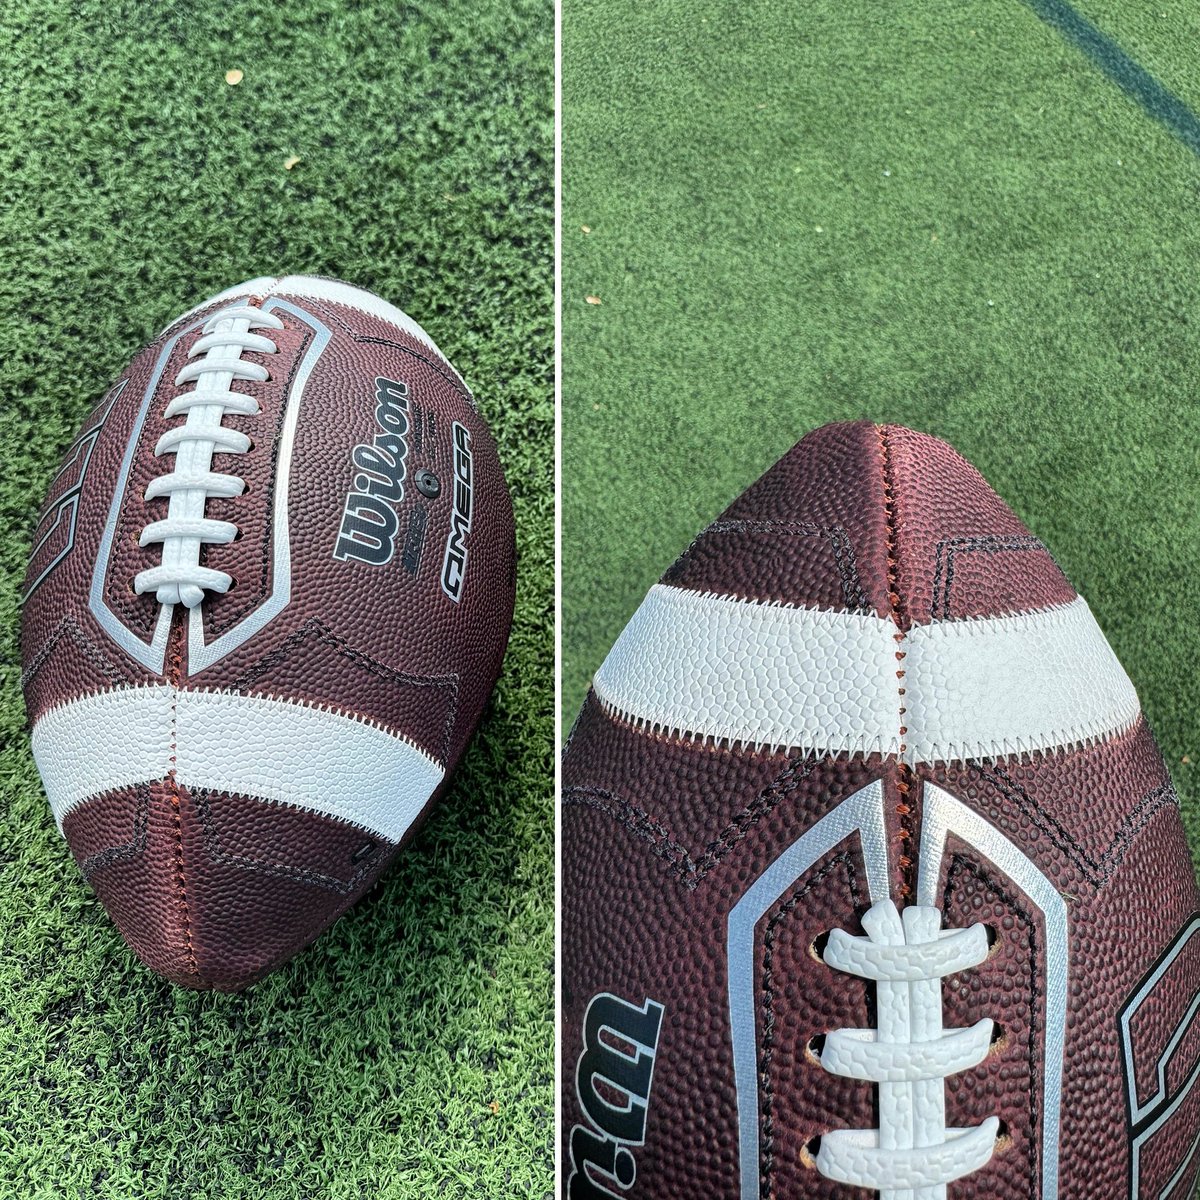 Meet the ball with no sweet spot. Good luck if you have to kick it! #kickingcoach #footballkicking #kickingcamps